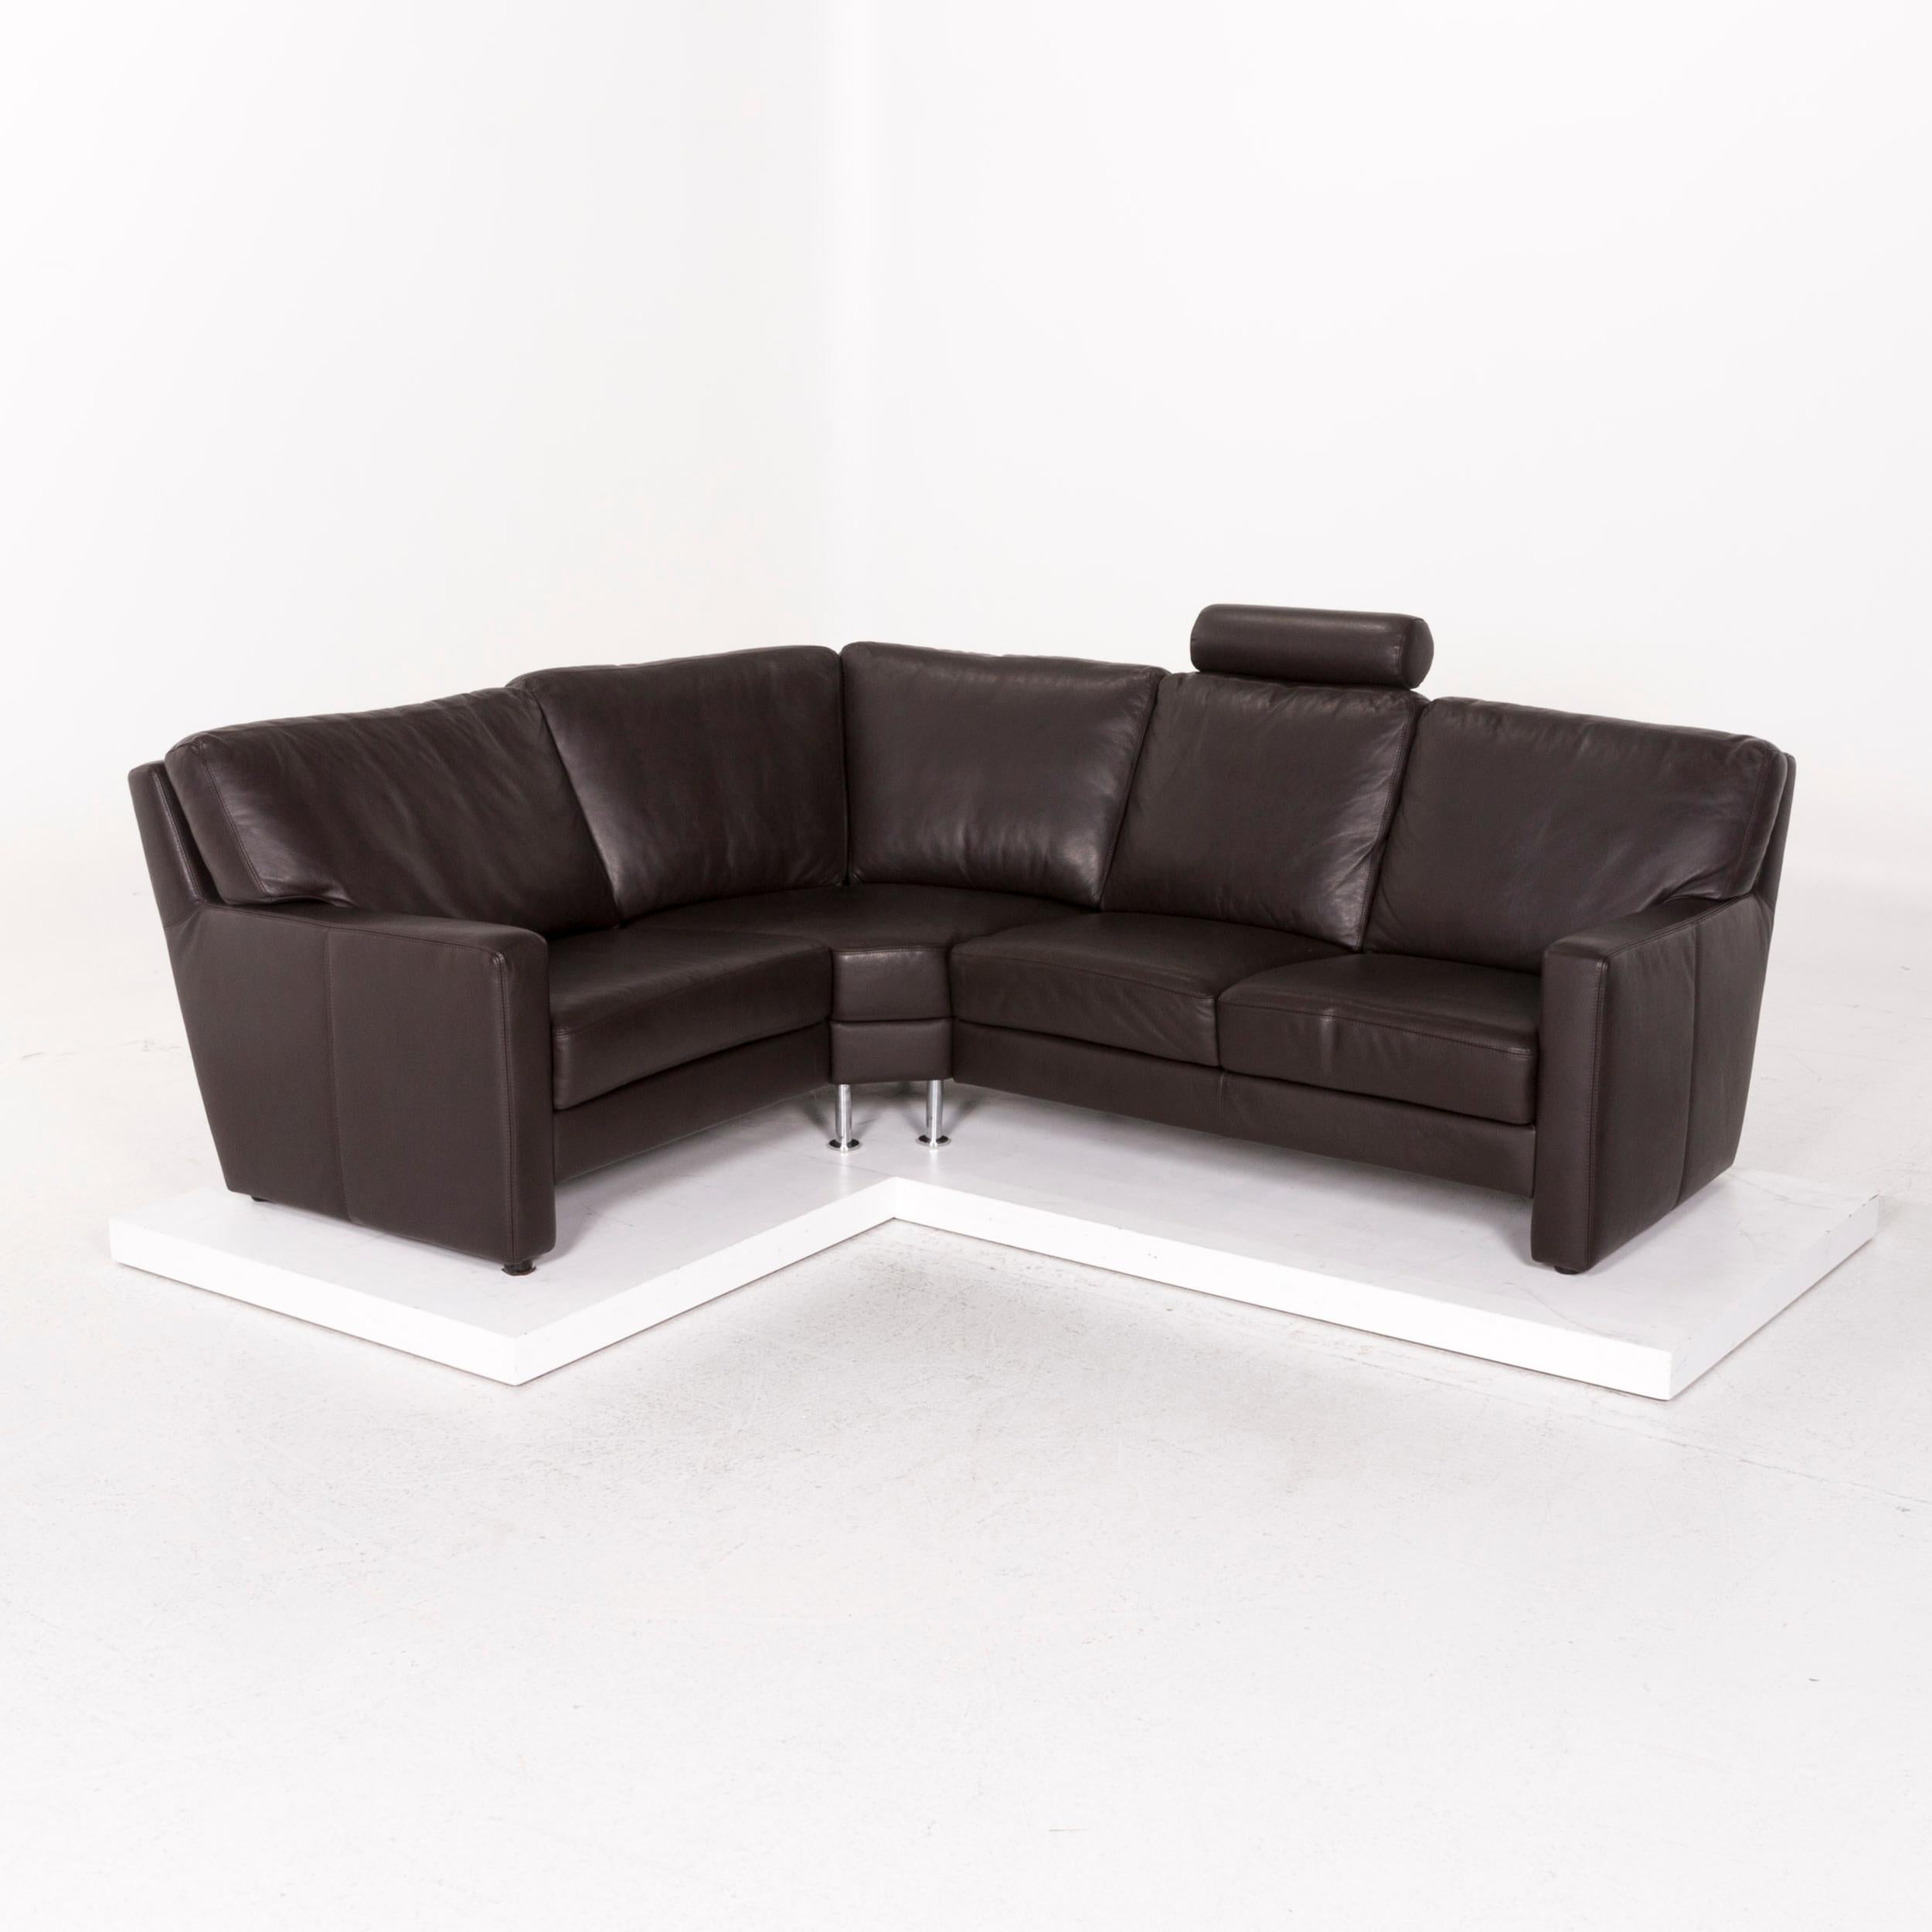 Sample Ring Leather Corner Sofa Brown Dark Brown Sofa Couch For Sale 1